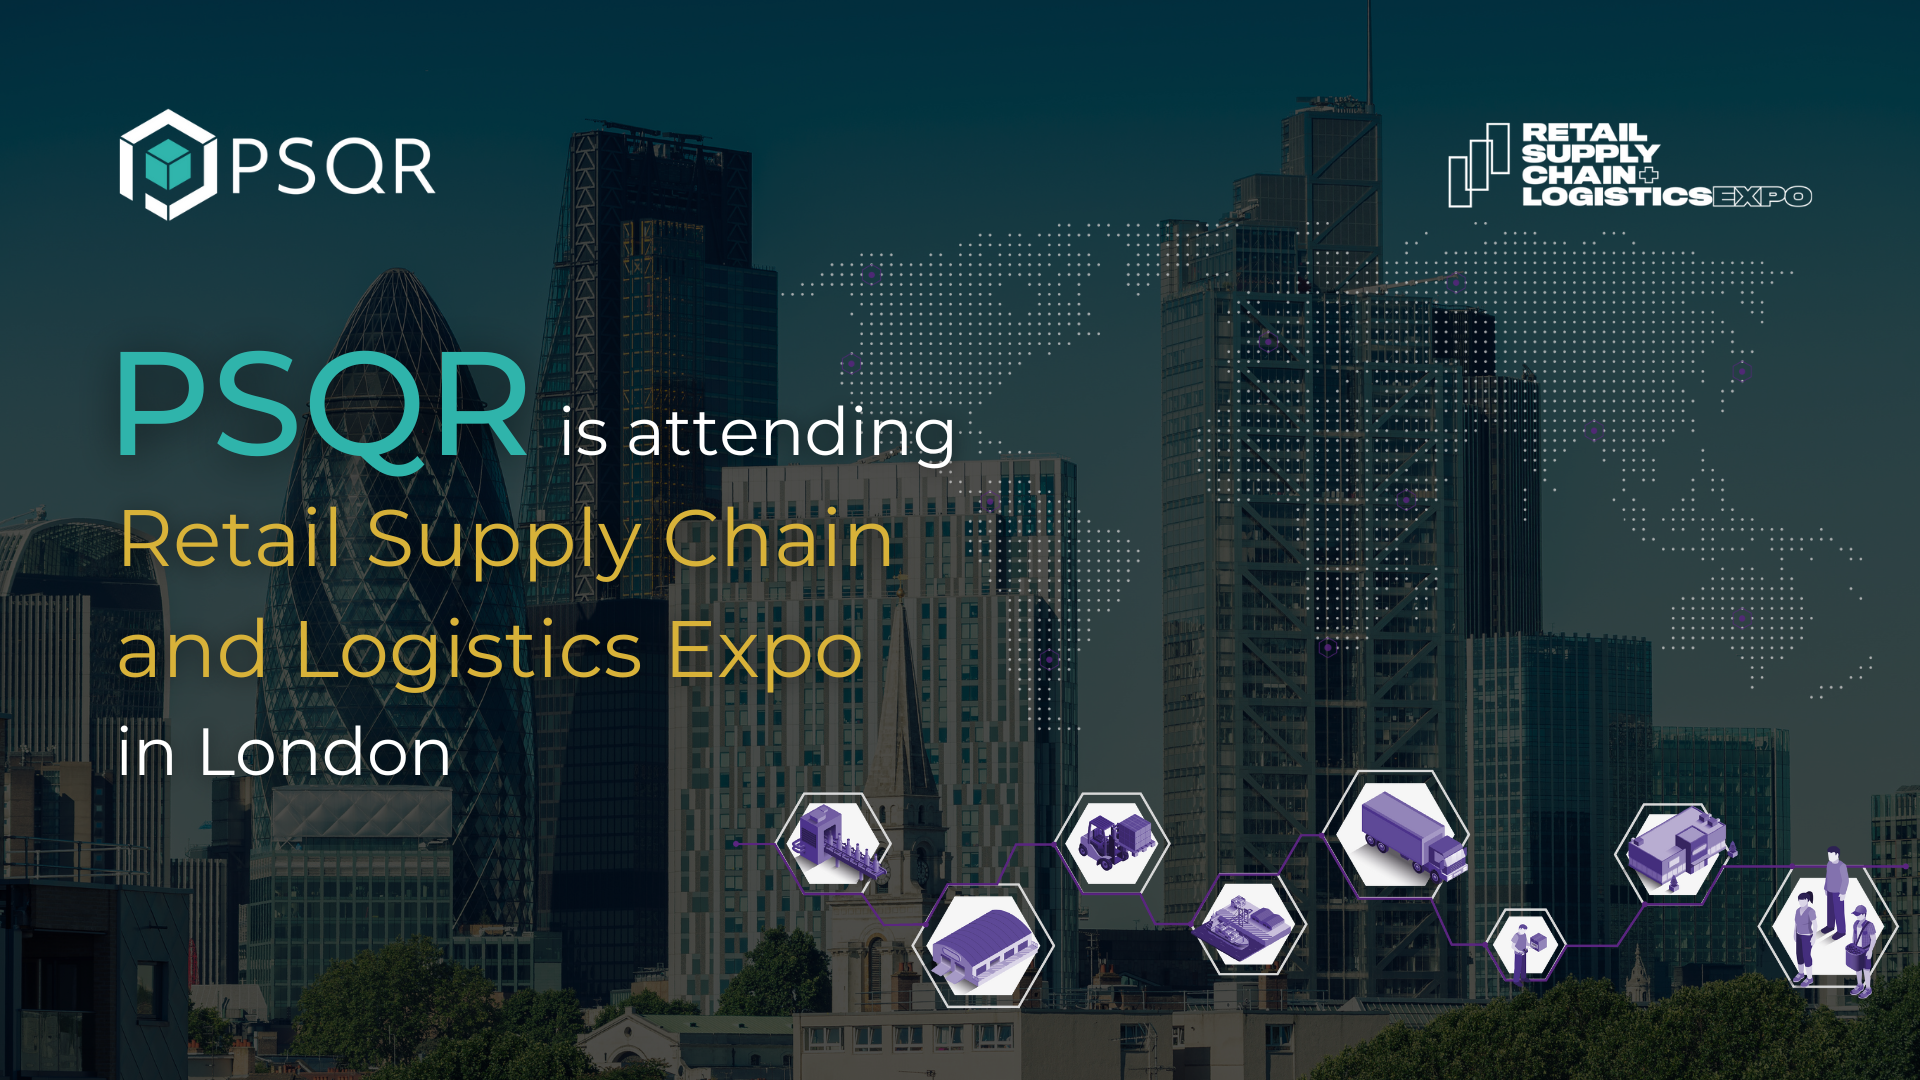 PSQR is attending Retail Supply Chain and Logistics Expo in London